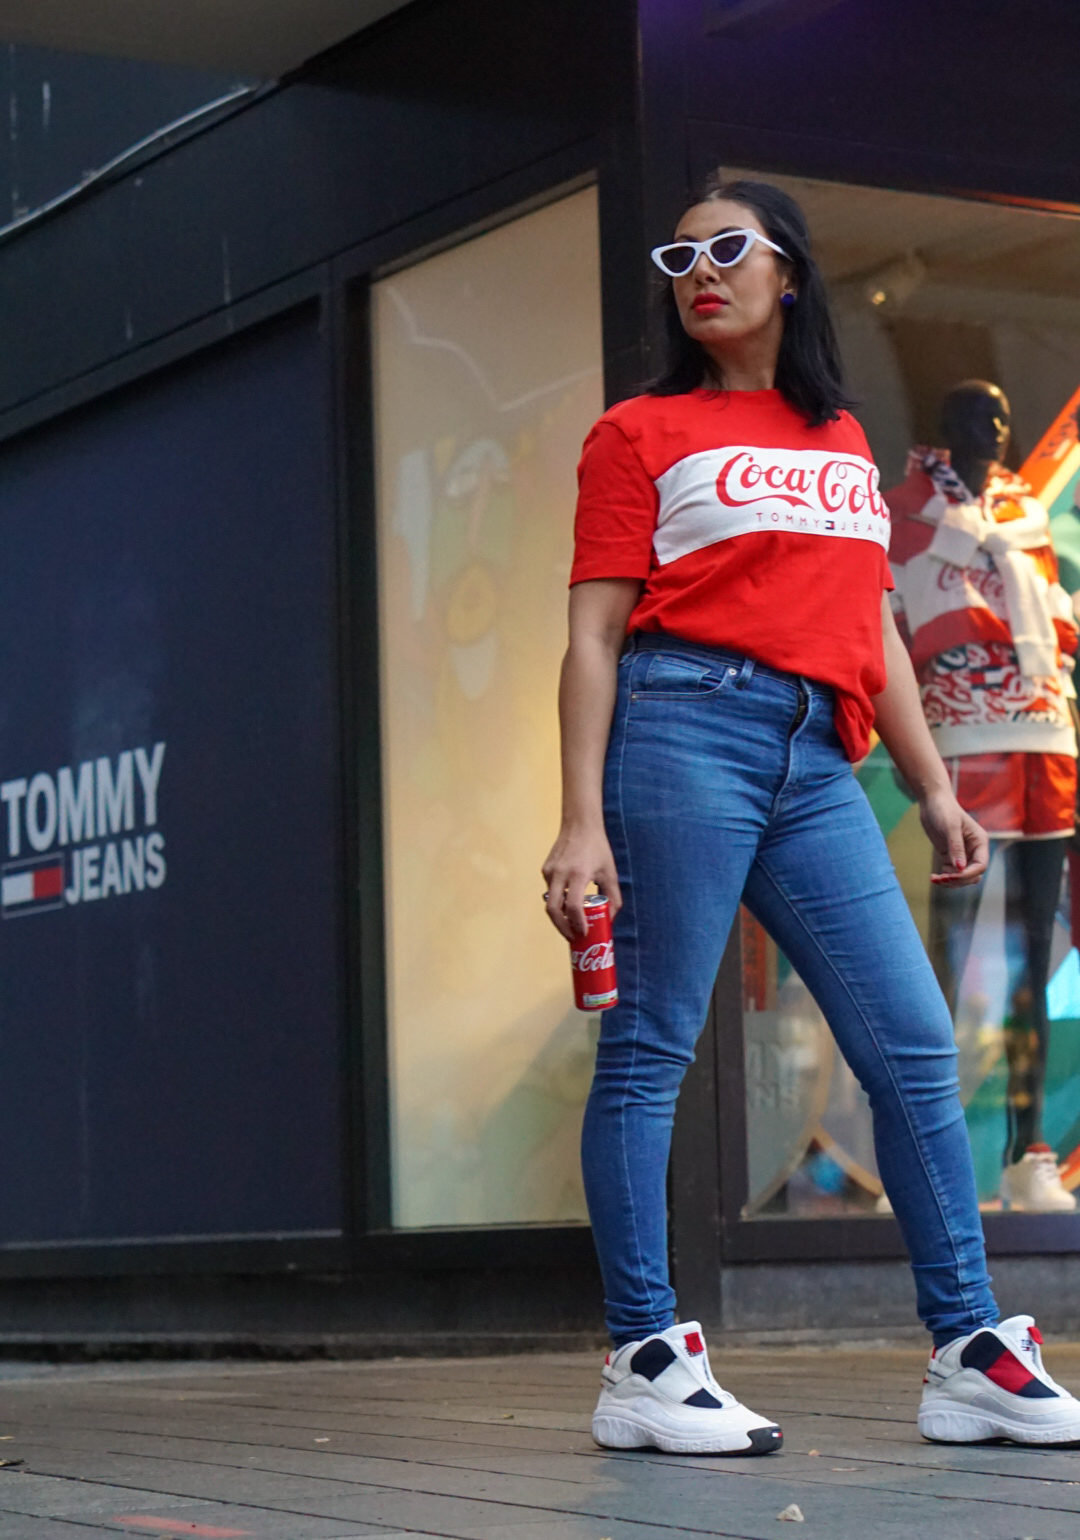 TOMMY JEANS X COCA COLA